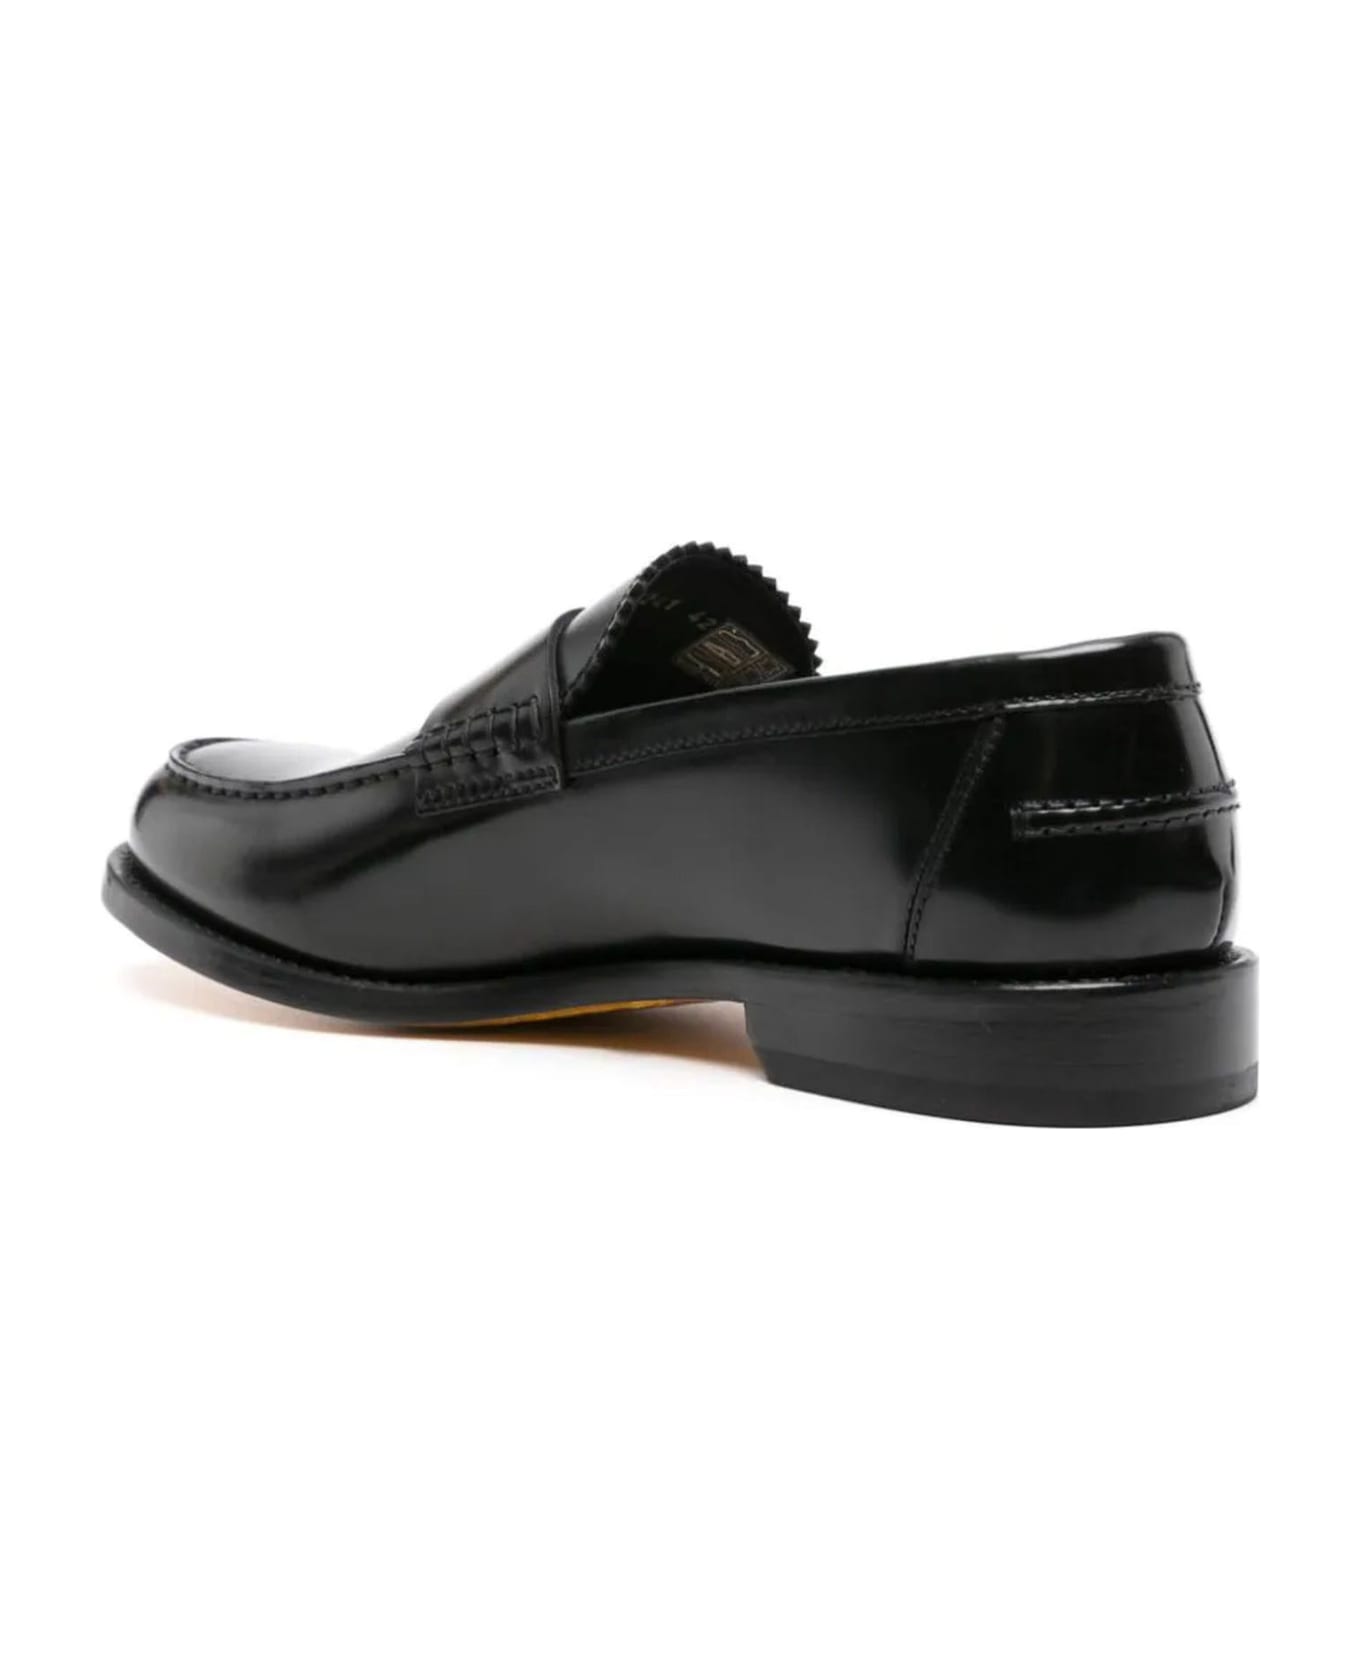 Doucal's Loafer In Black Leather - Black ローファー＆デッキシューズ